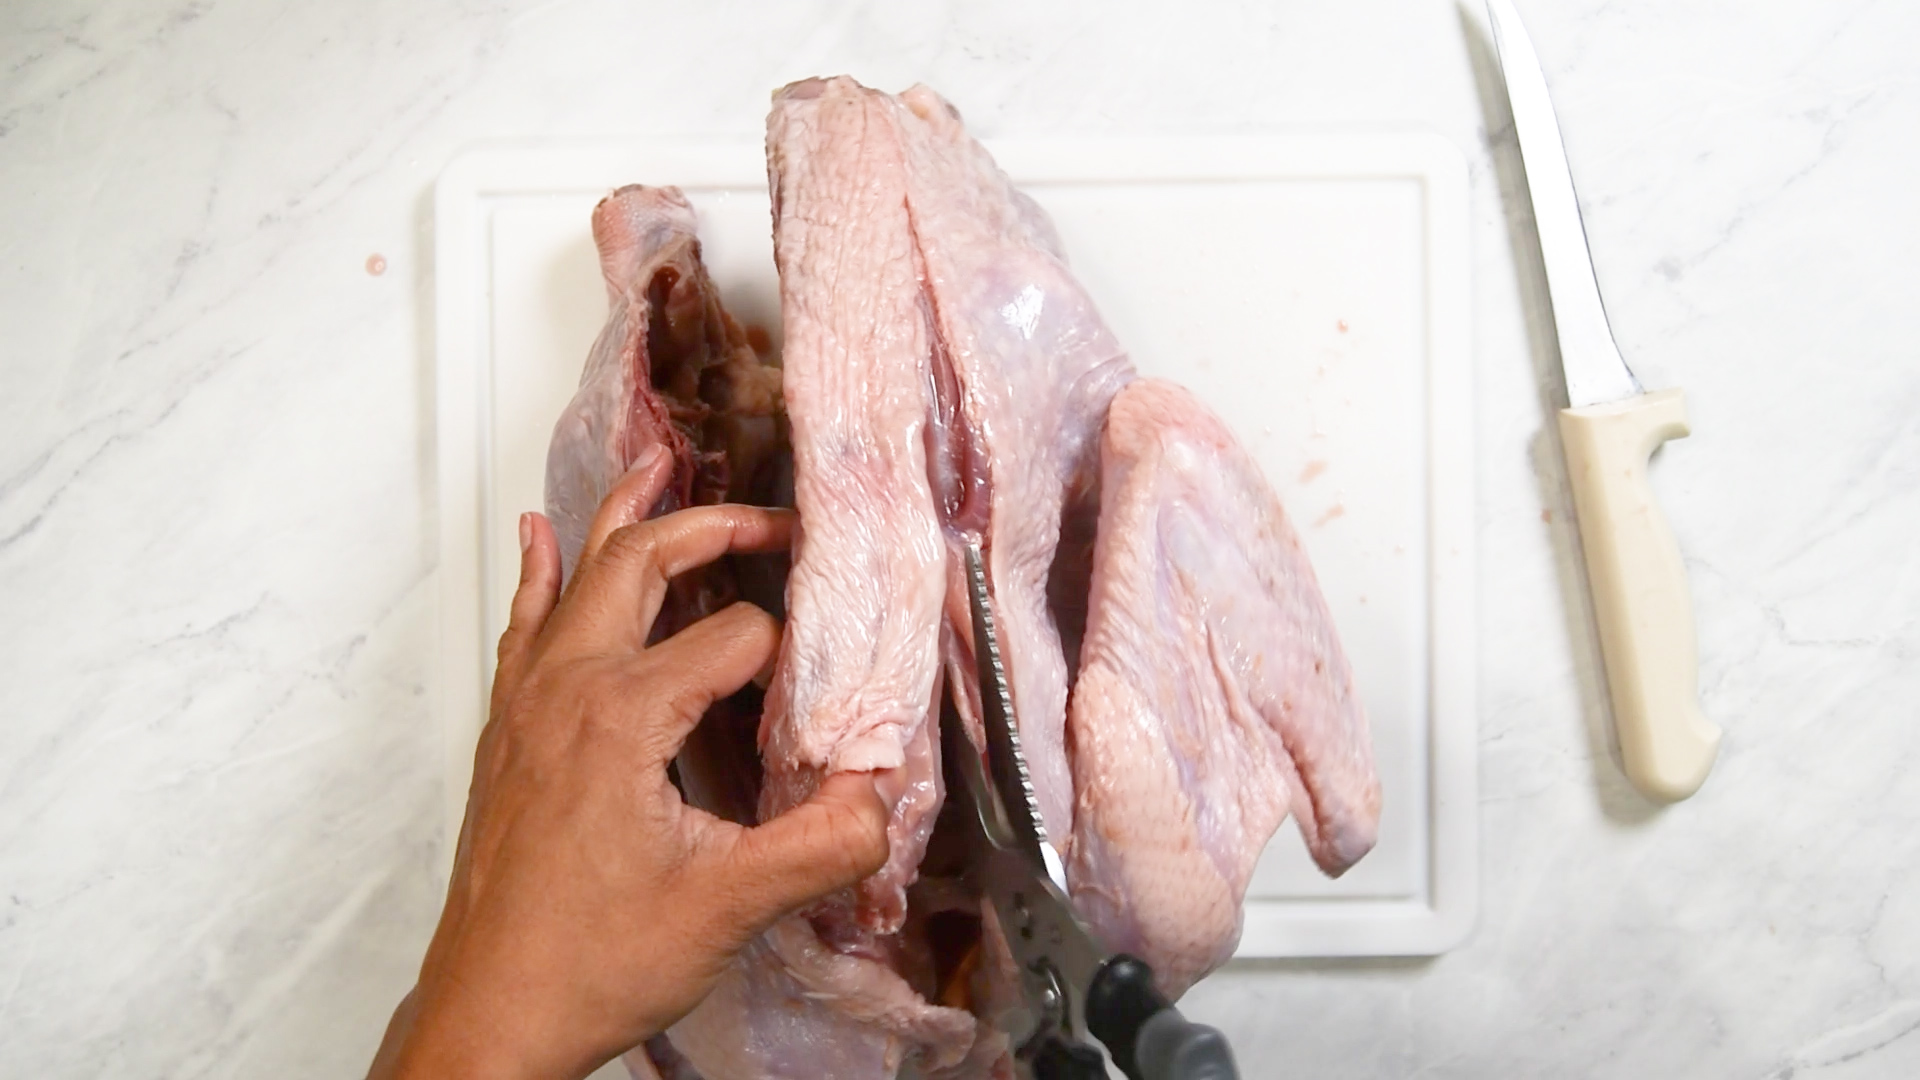 How to Spatchcock a Turkey (Step-by-Step Guide with Photos!)